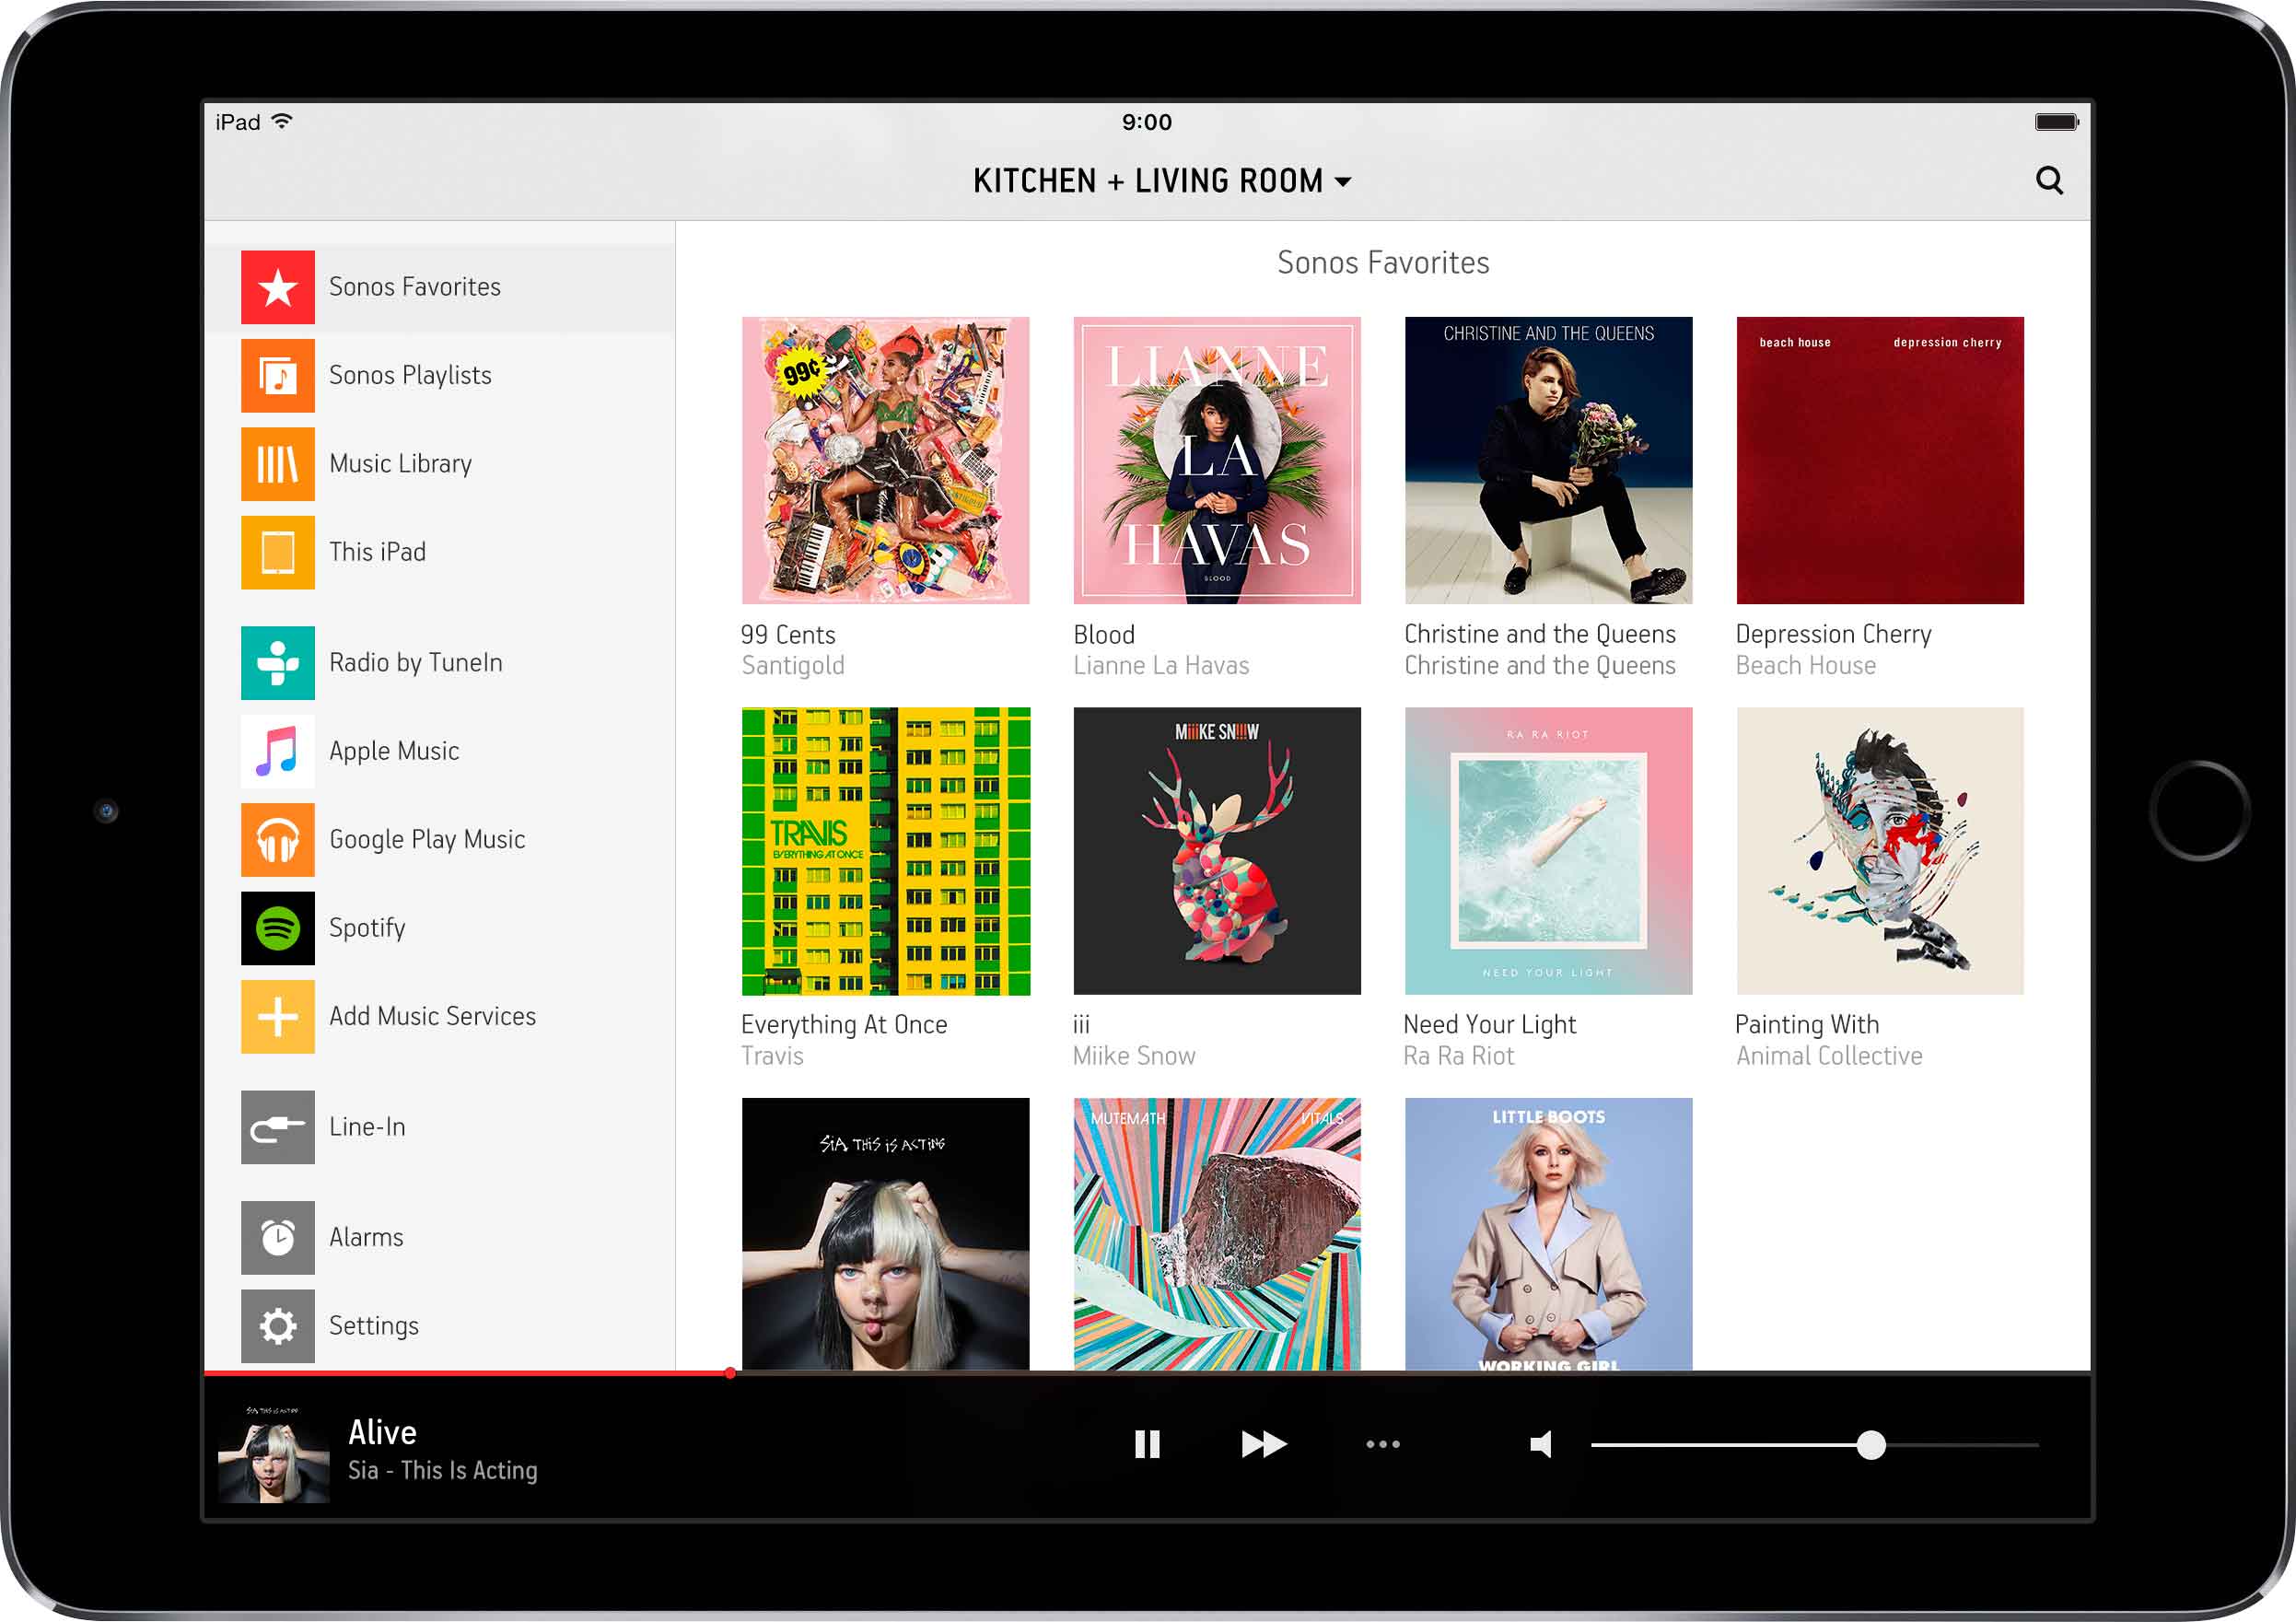 Sonos has new focus on streaming, voice recognition